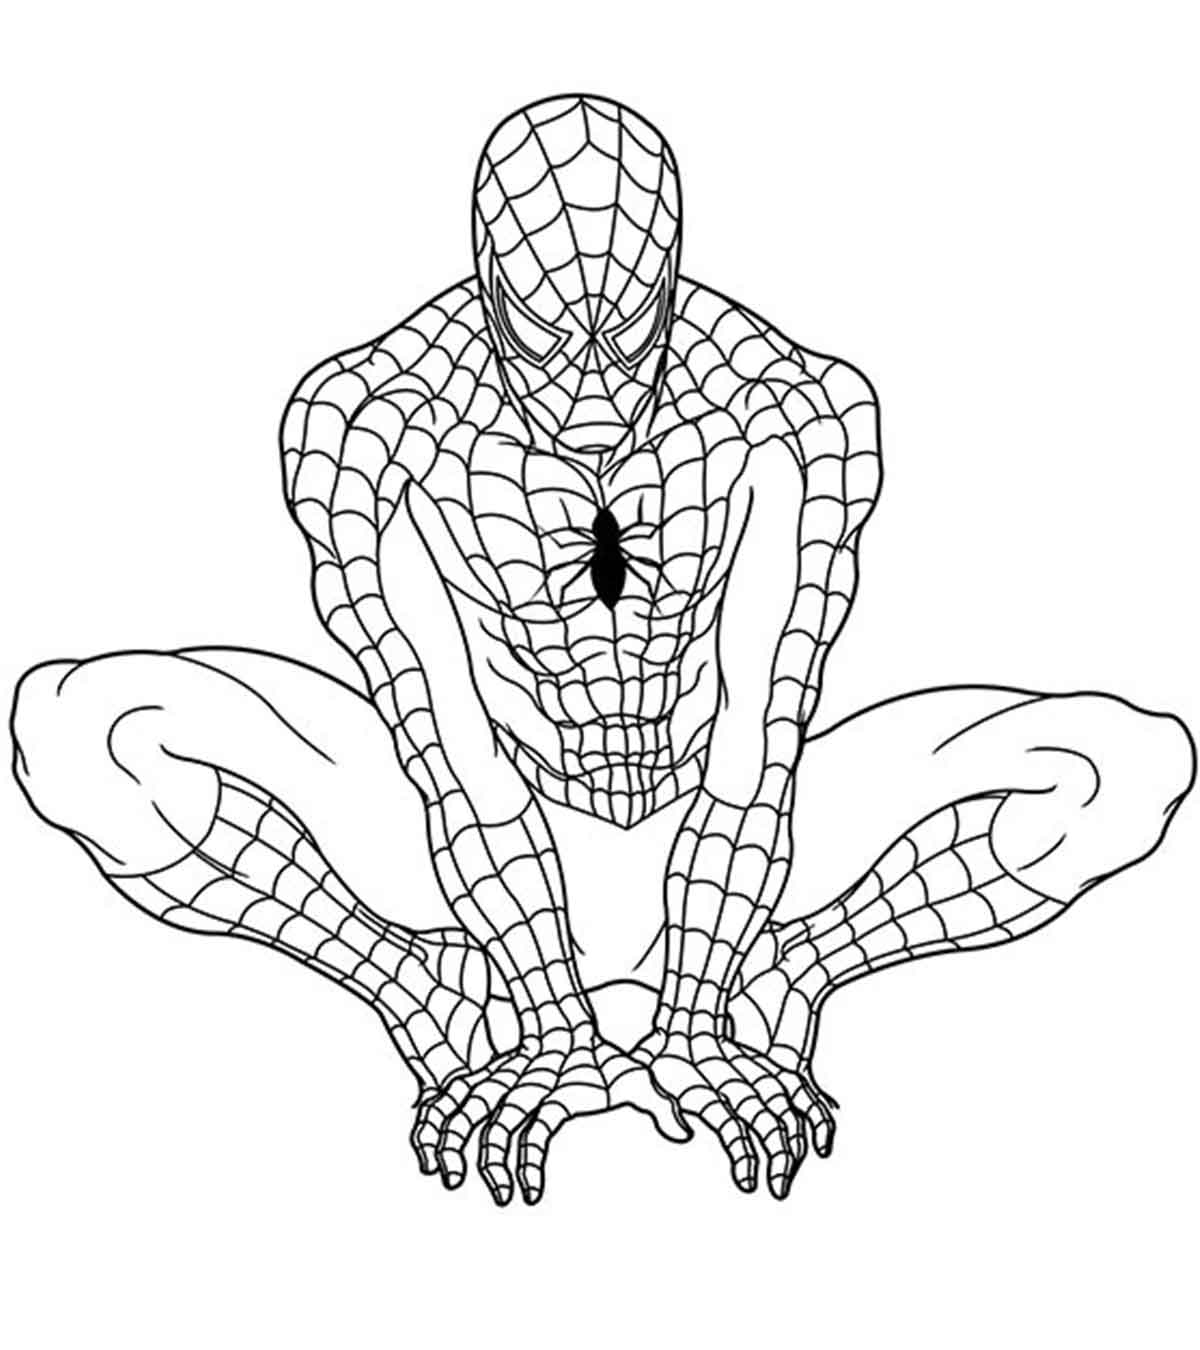 Top 20 Superhero Coloring Pages For Your Little Ones